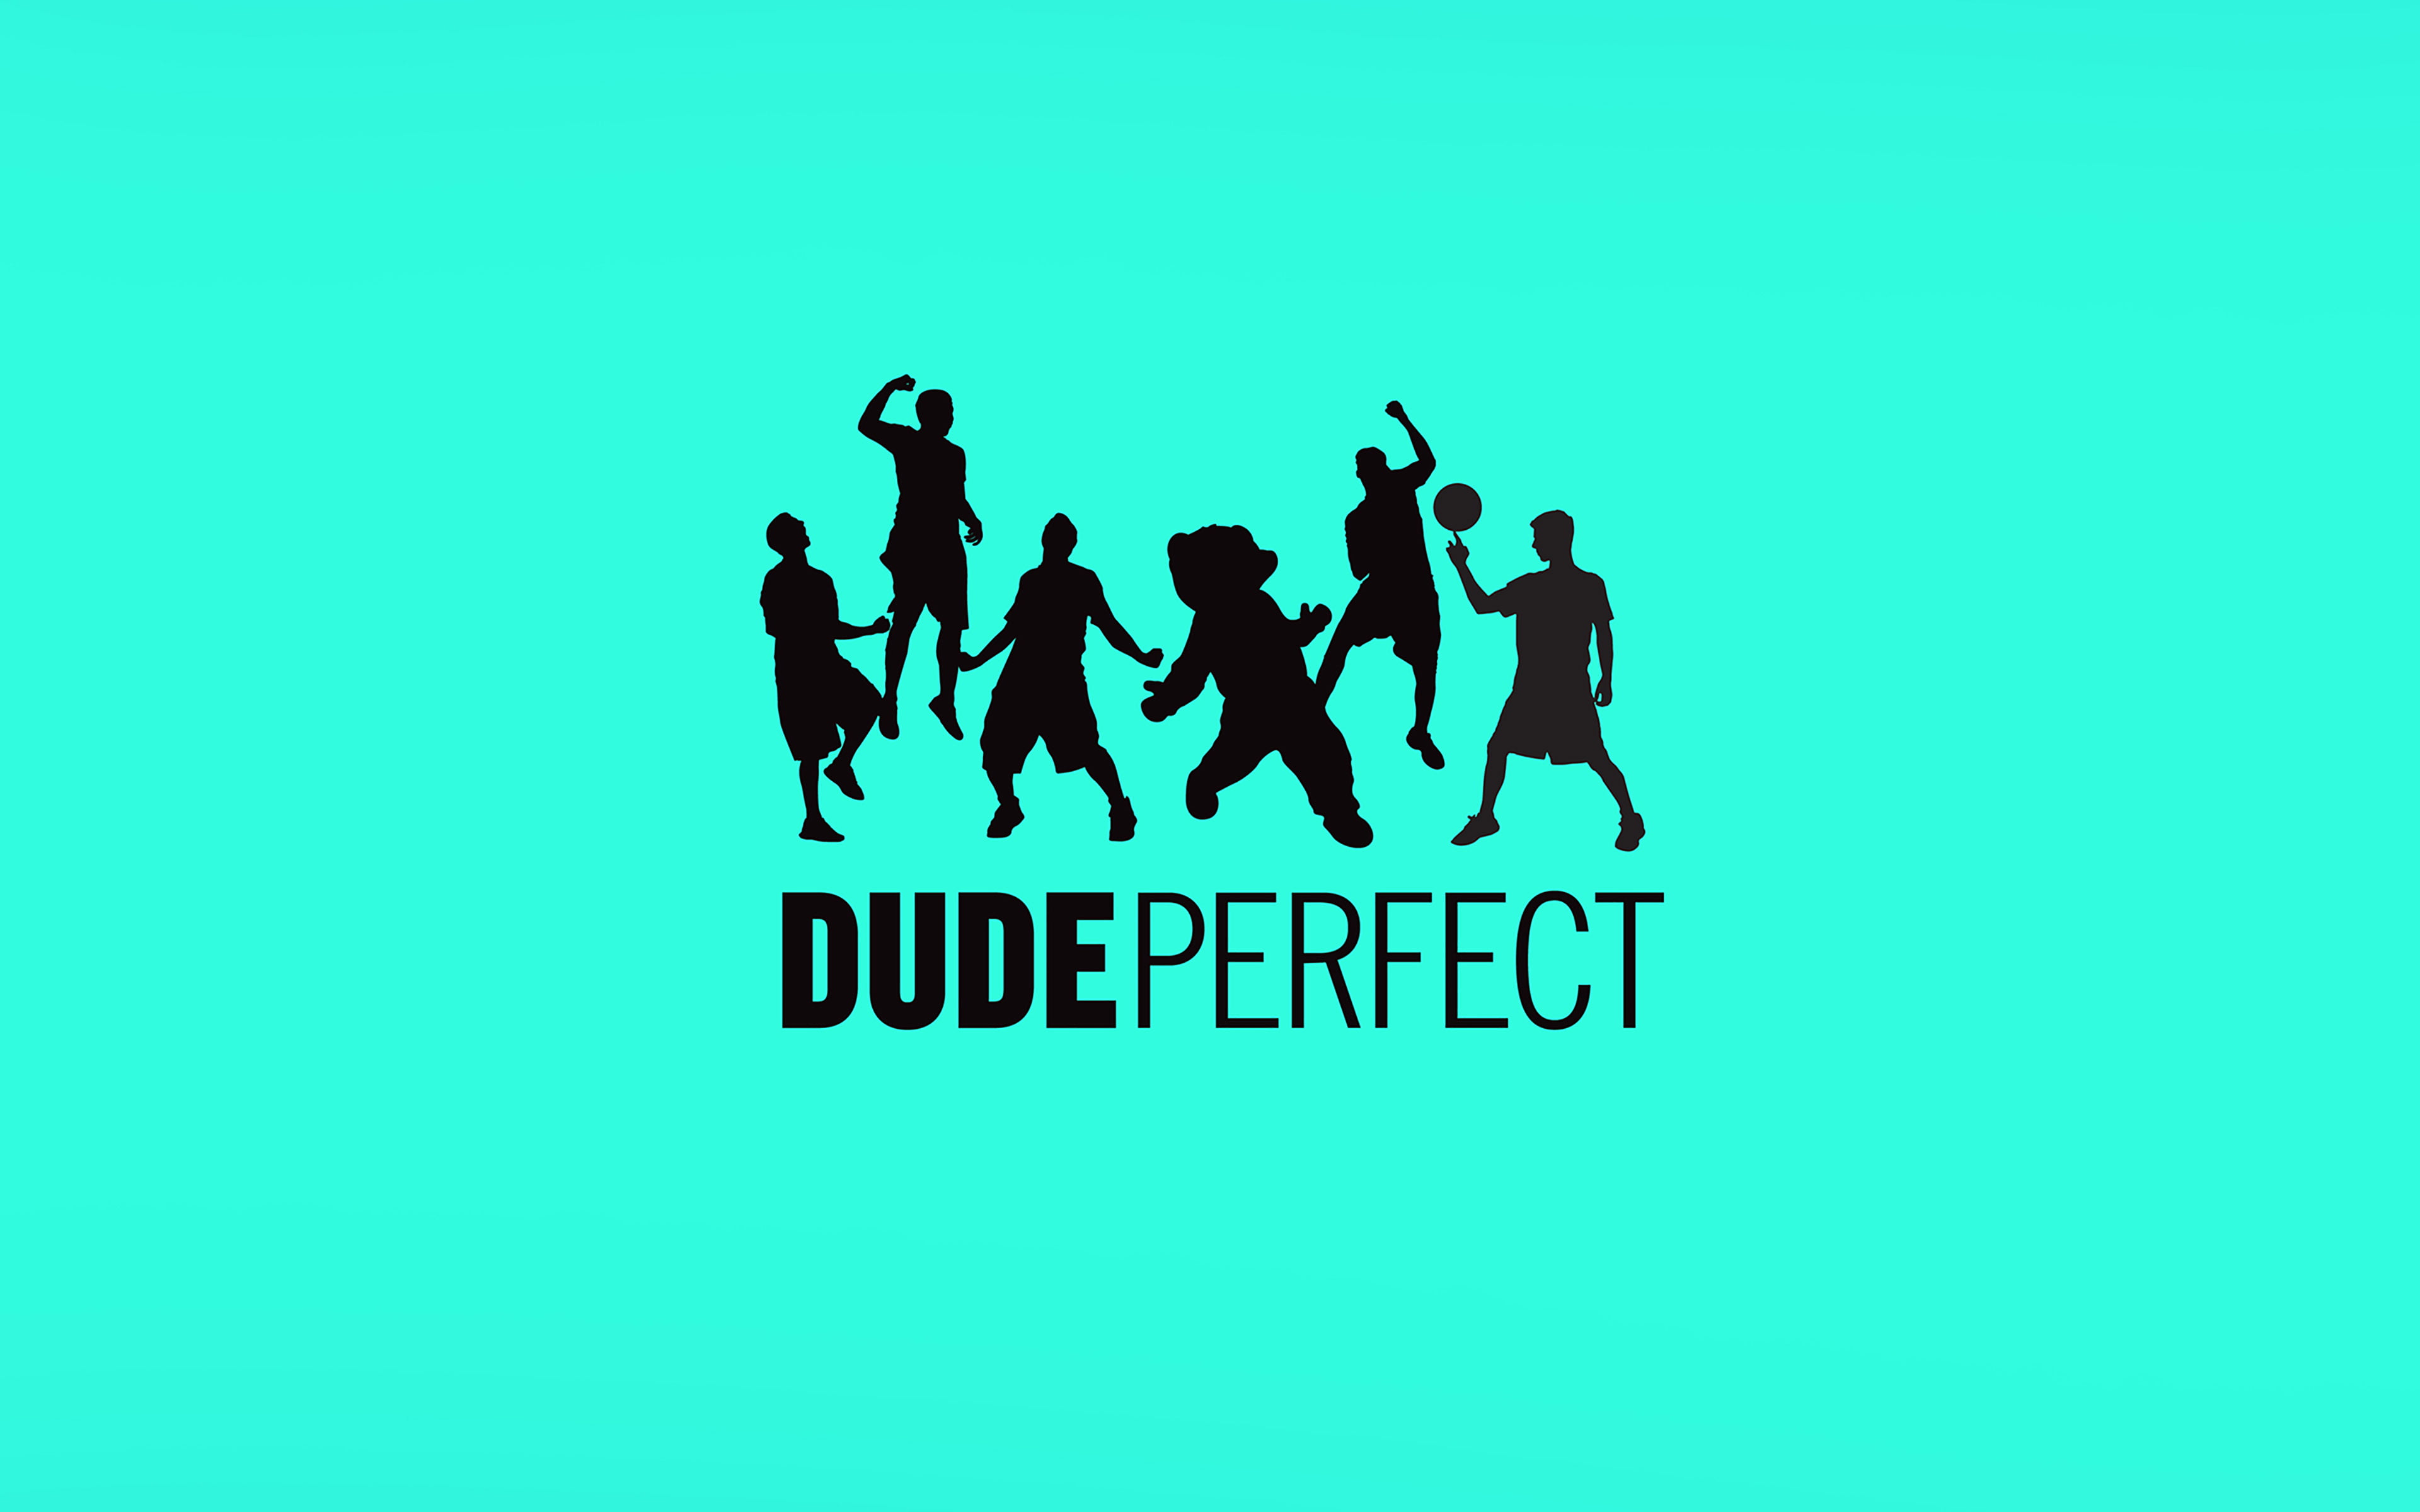 wallpaper, dude, perfect, logo, music, text, group of people